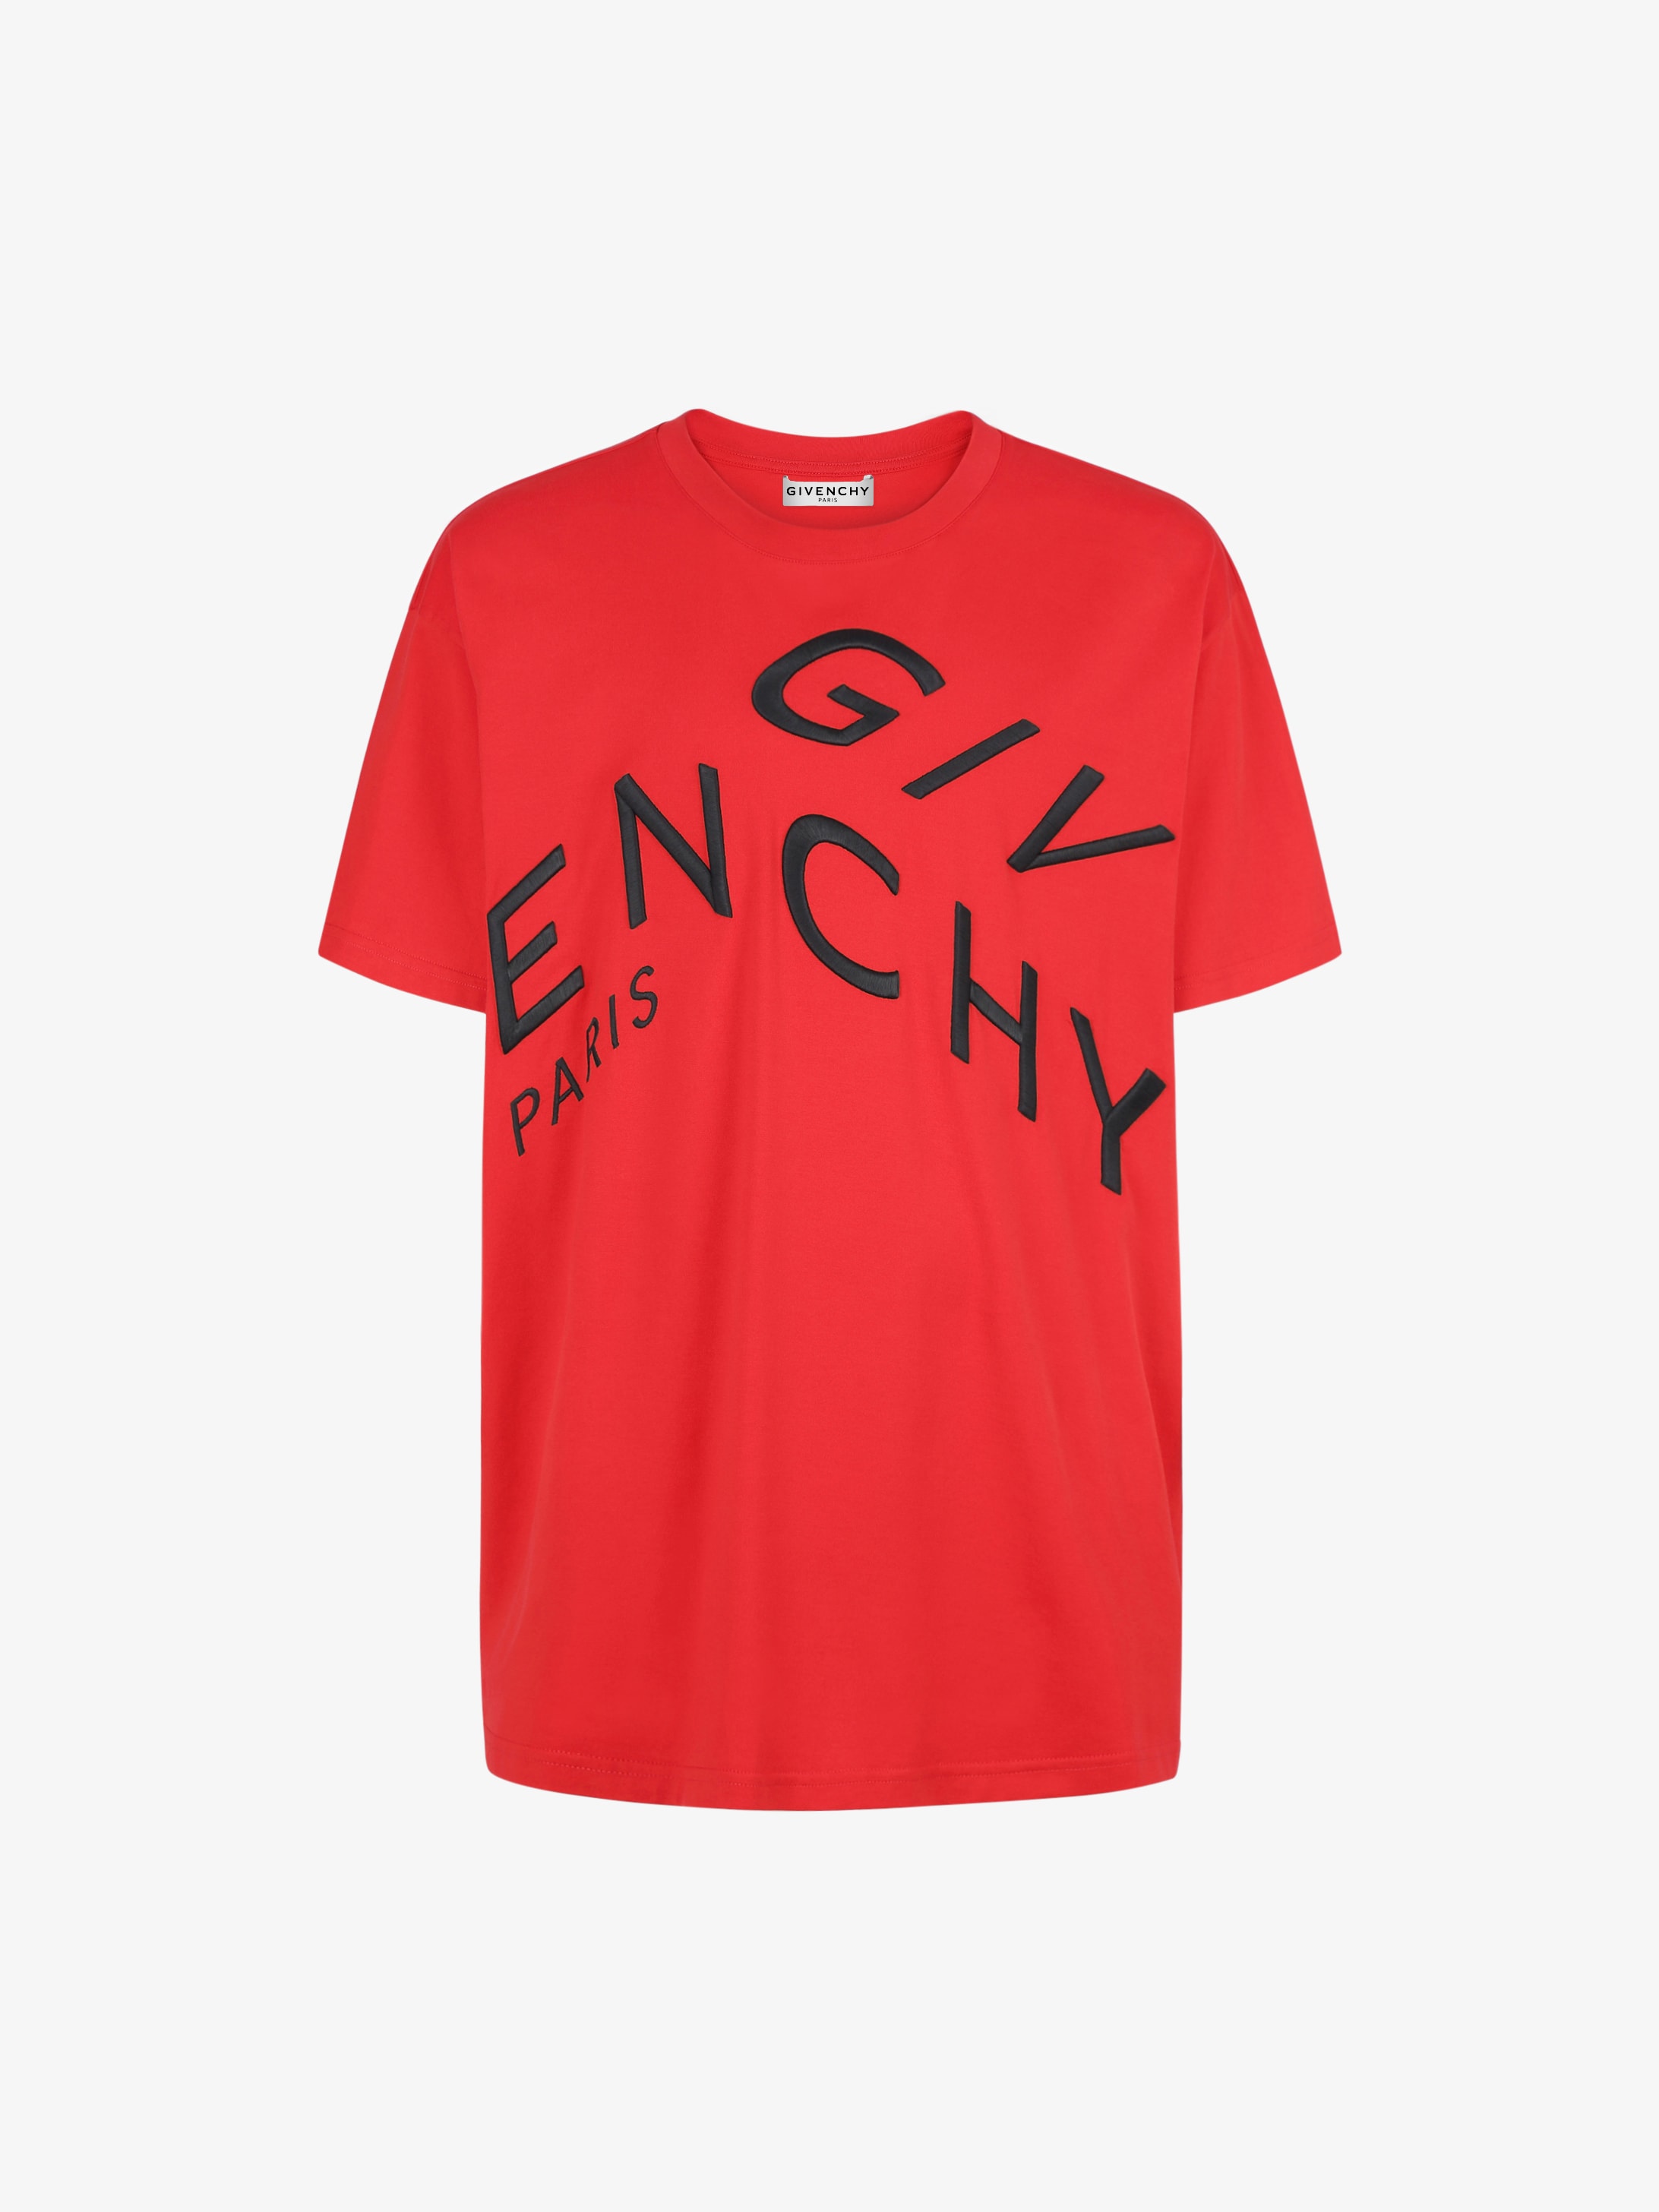 GIVENCHY Refracted embroidered oversized T-shirt | GIVENCHY Paris